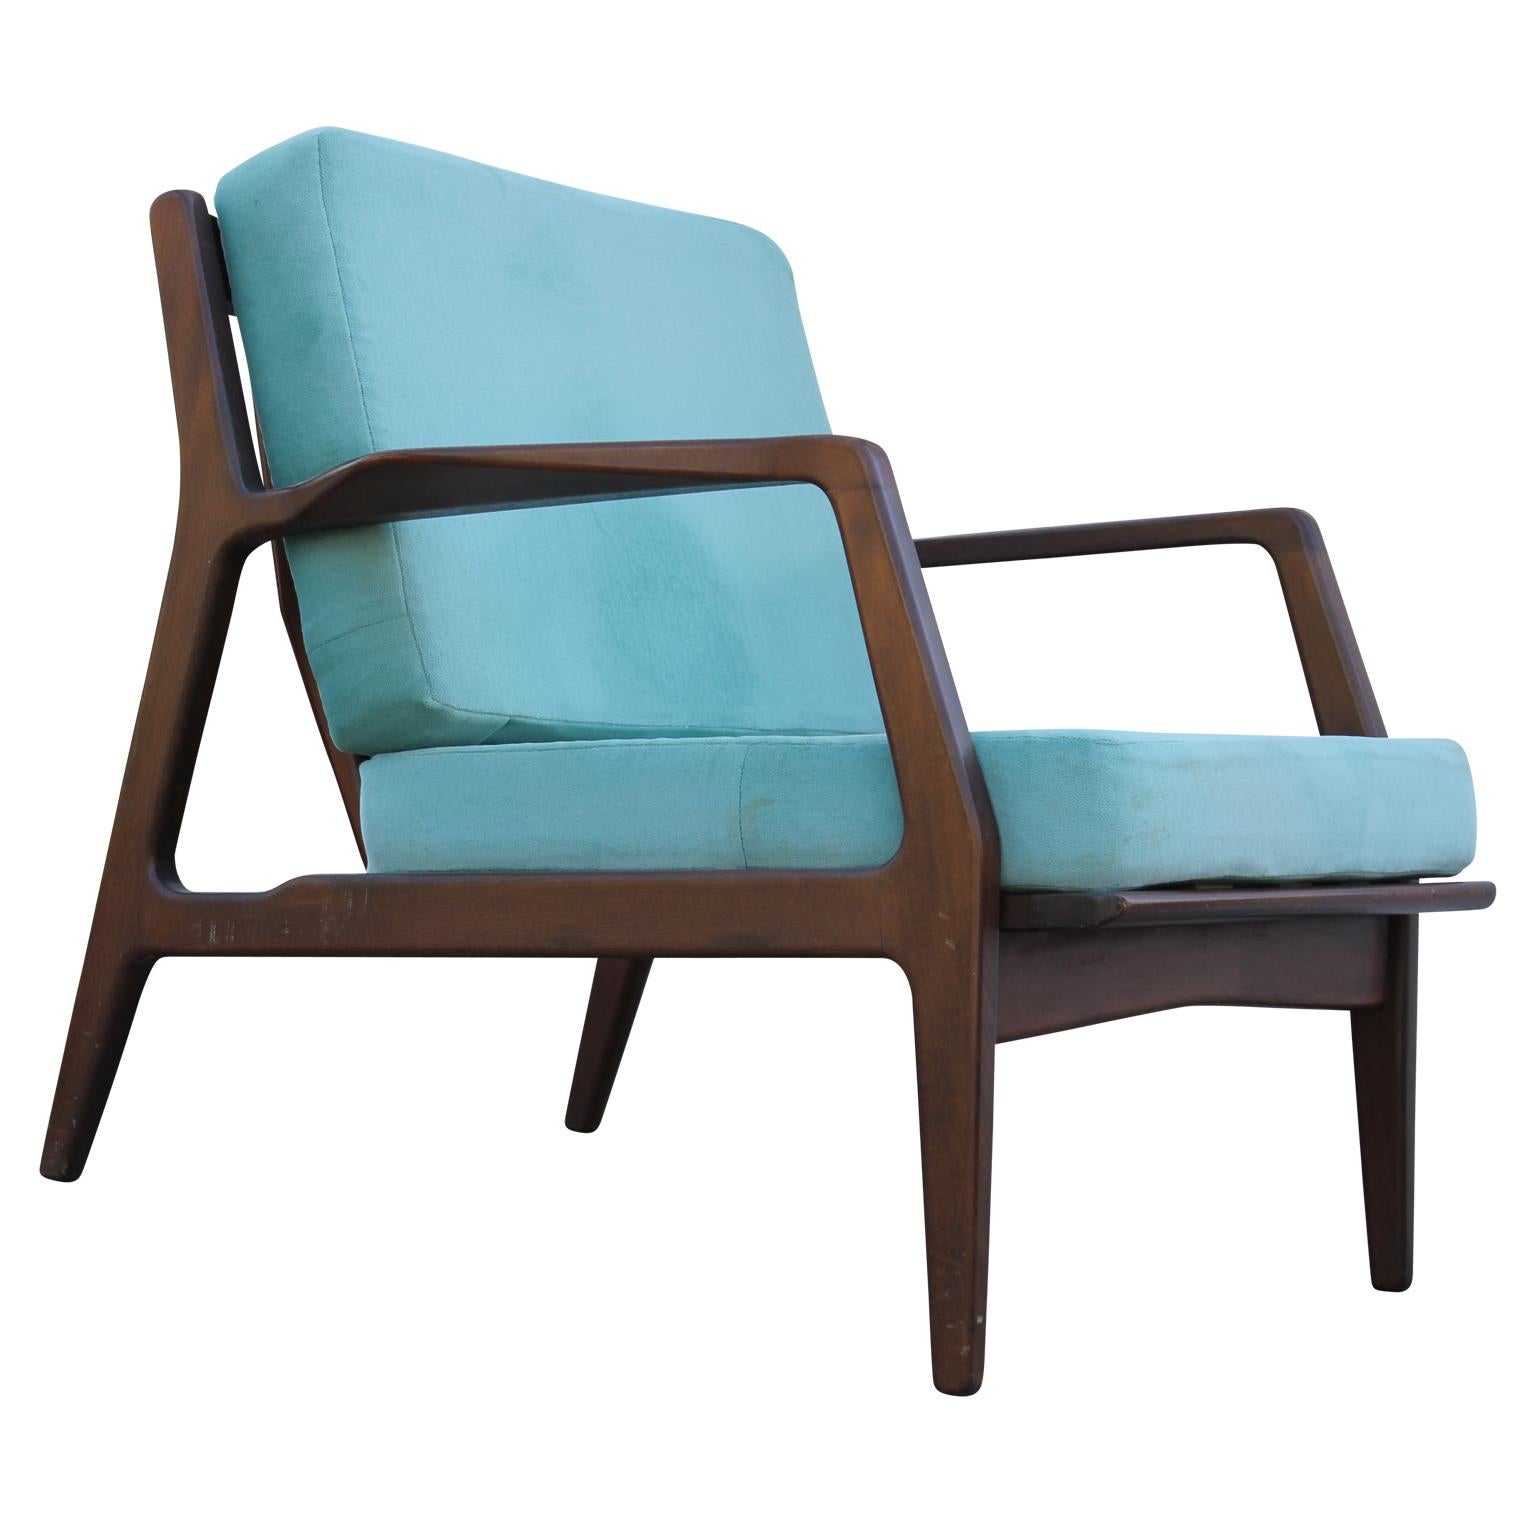 Pair of comfy and beautiful lounge chairs by Ib Kofod Larsen for Selig. They're made from teak wood, and we suggest that the customer reupholsters with COM.